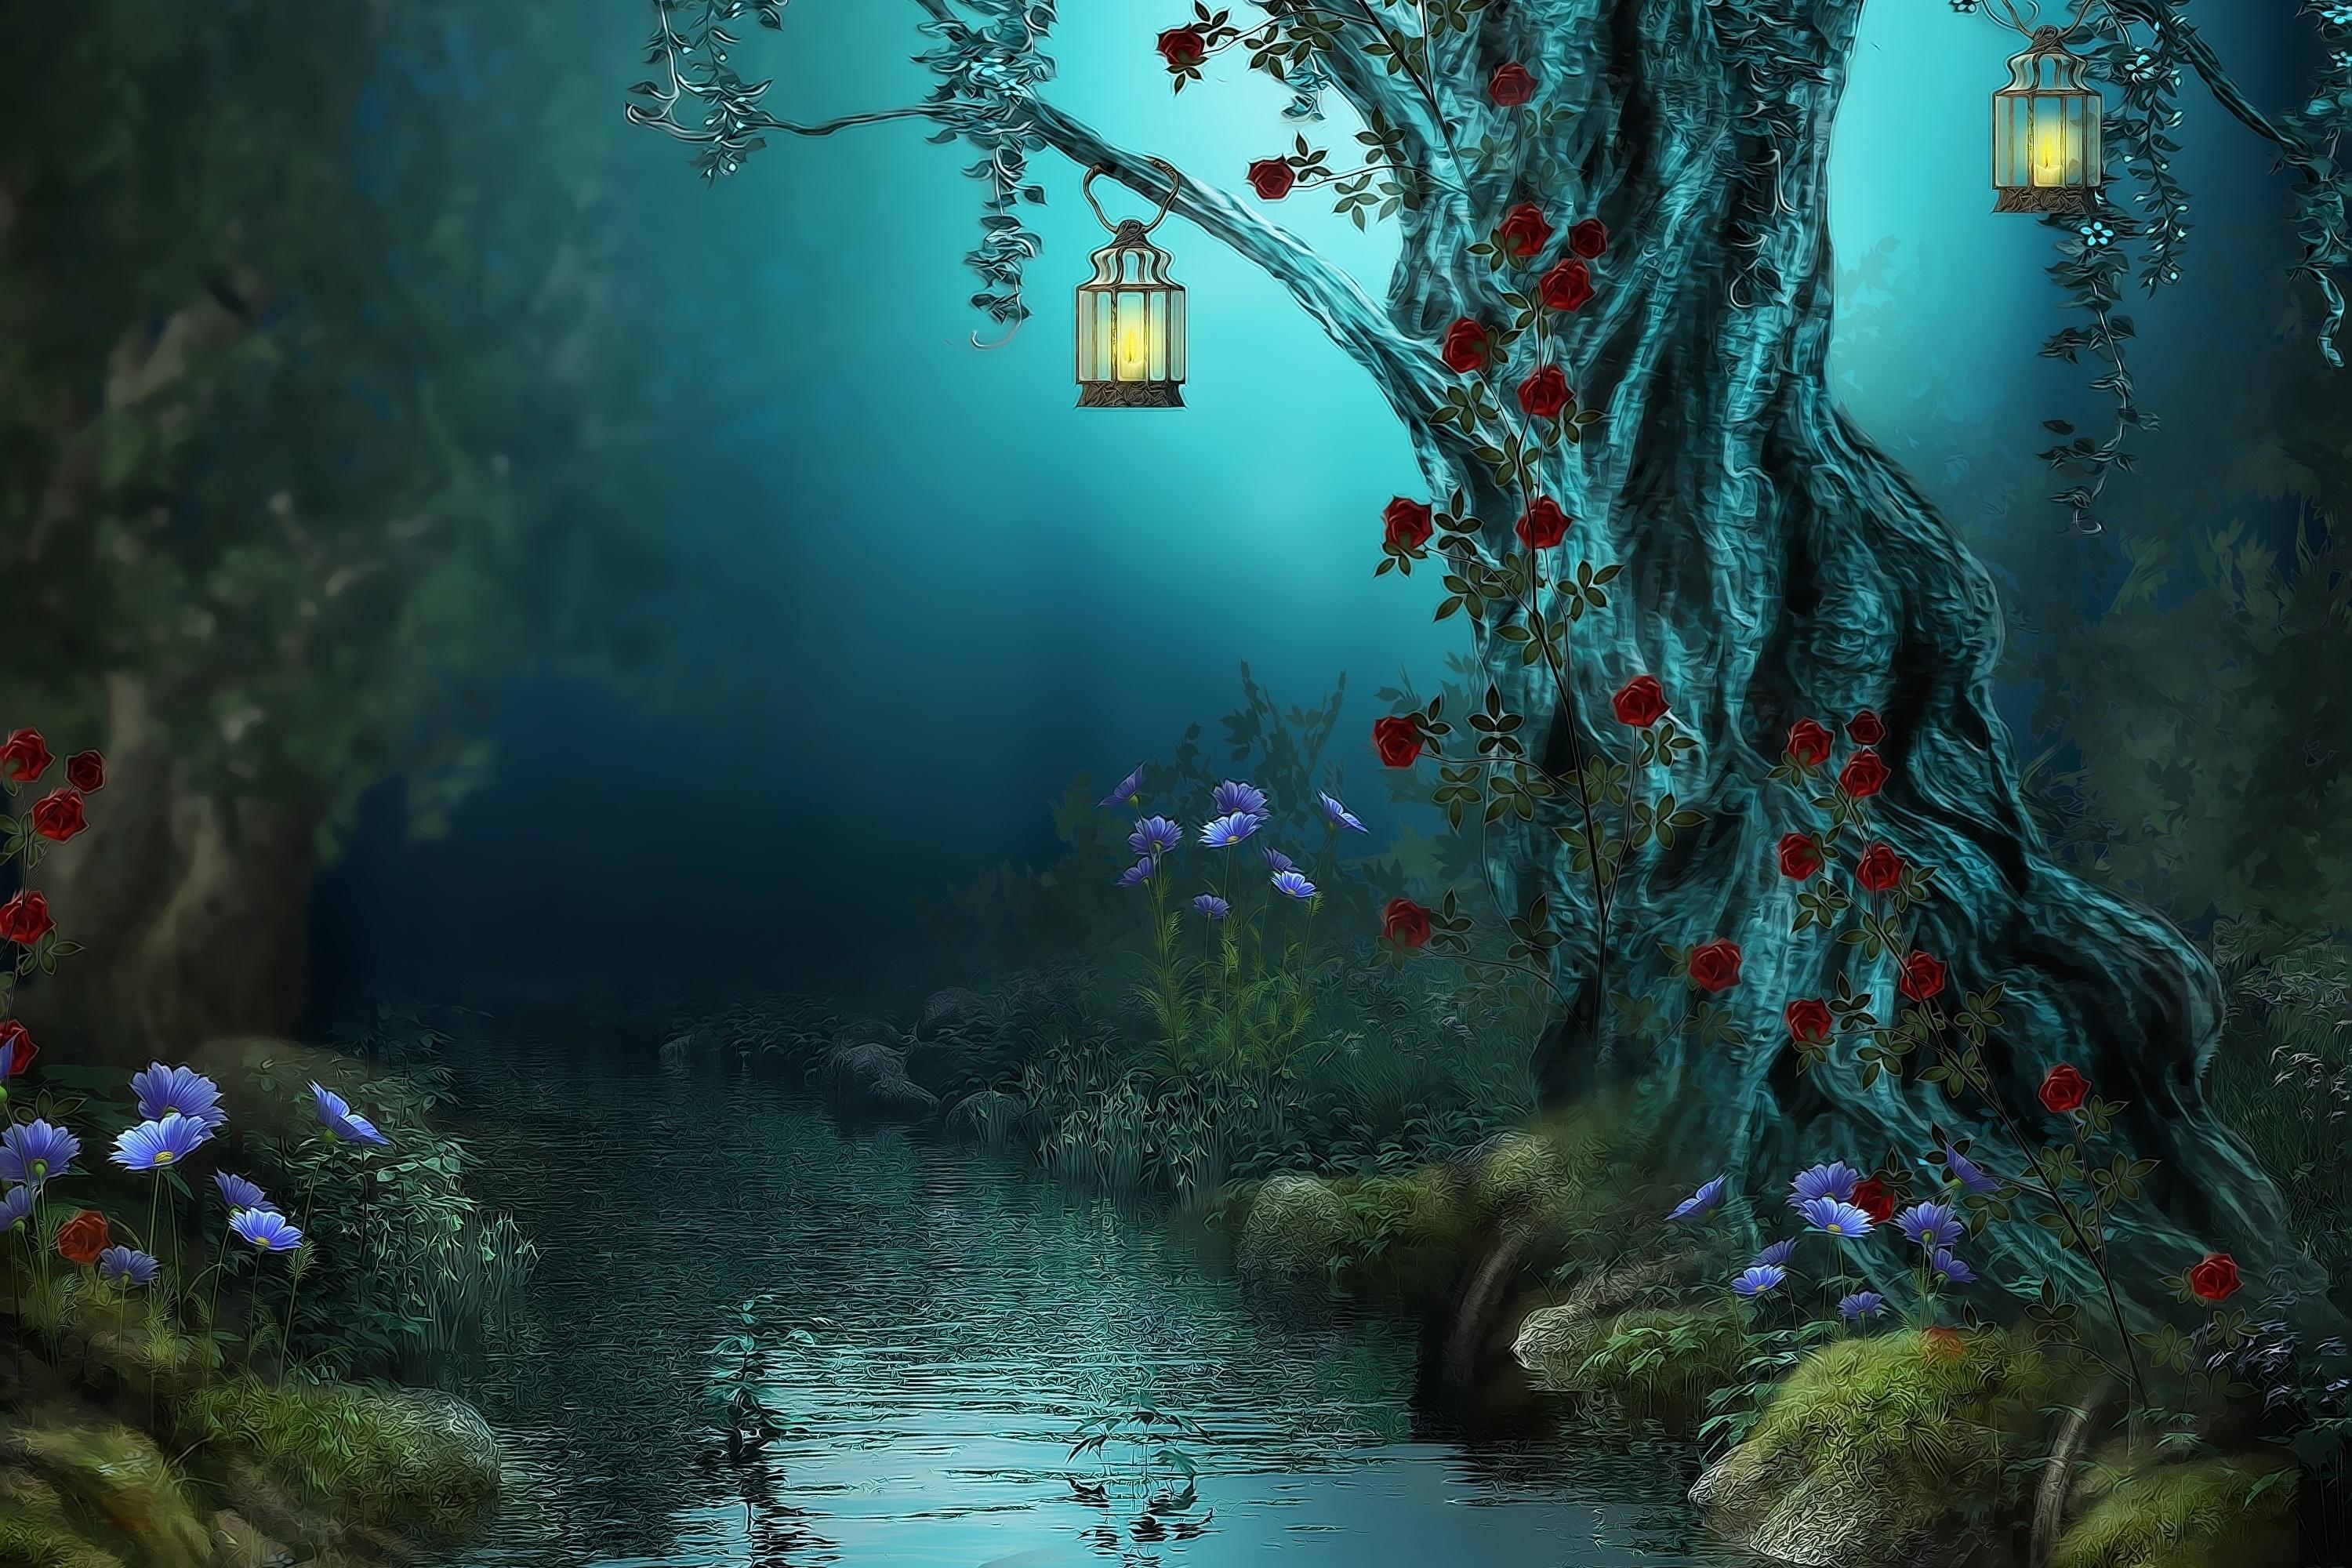 Magical Forest Wallpaper, image collections of wallpaper